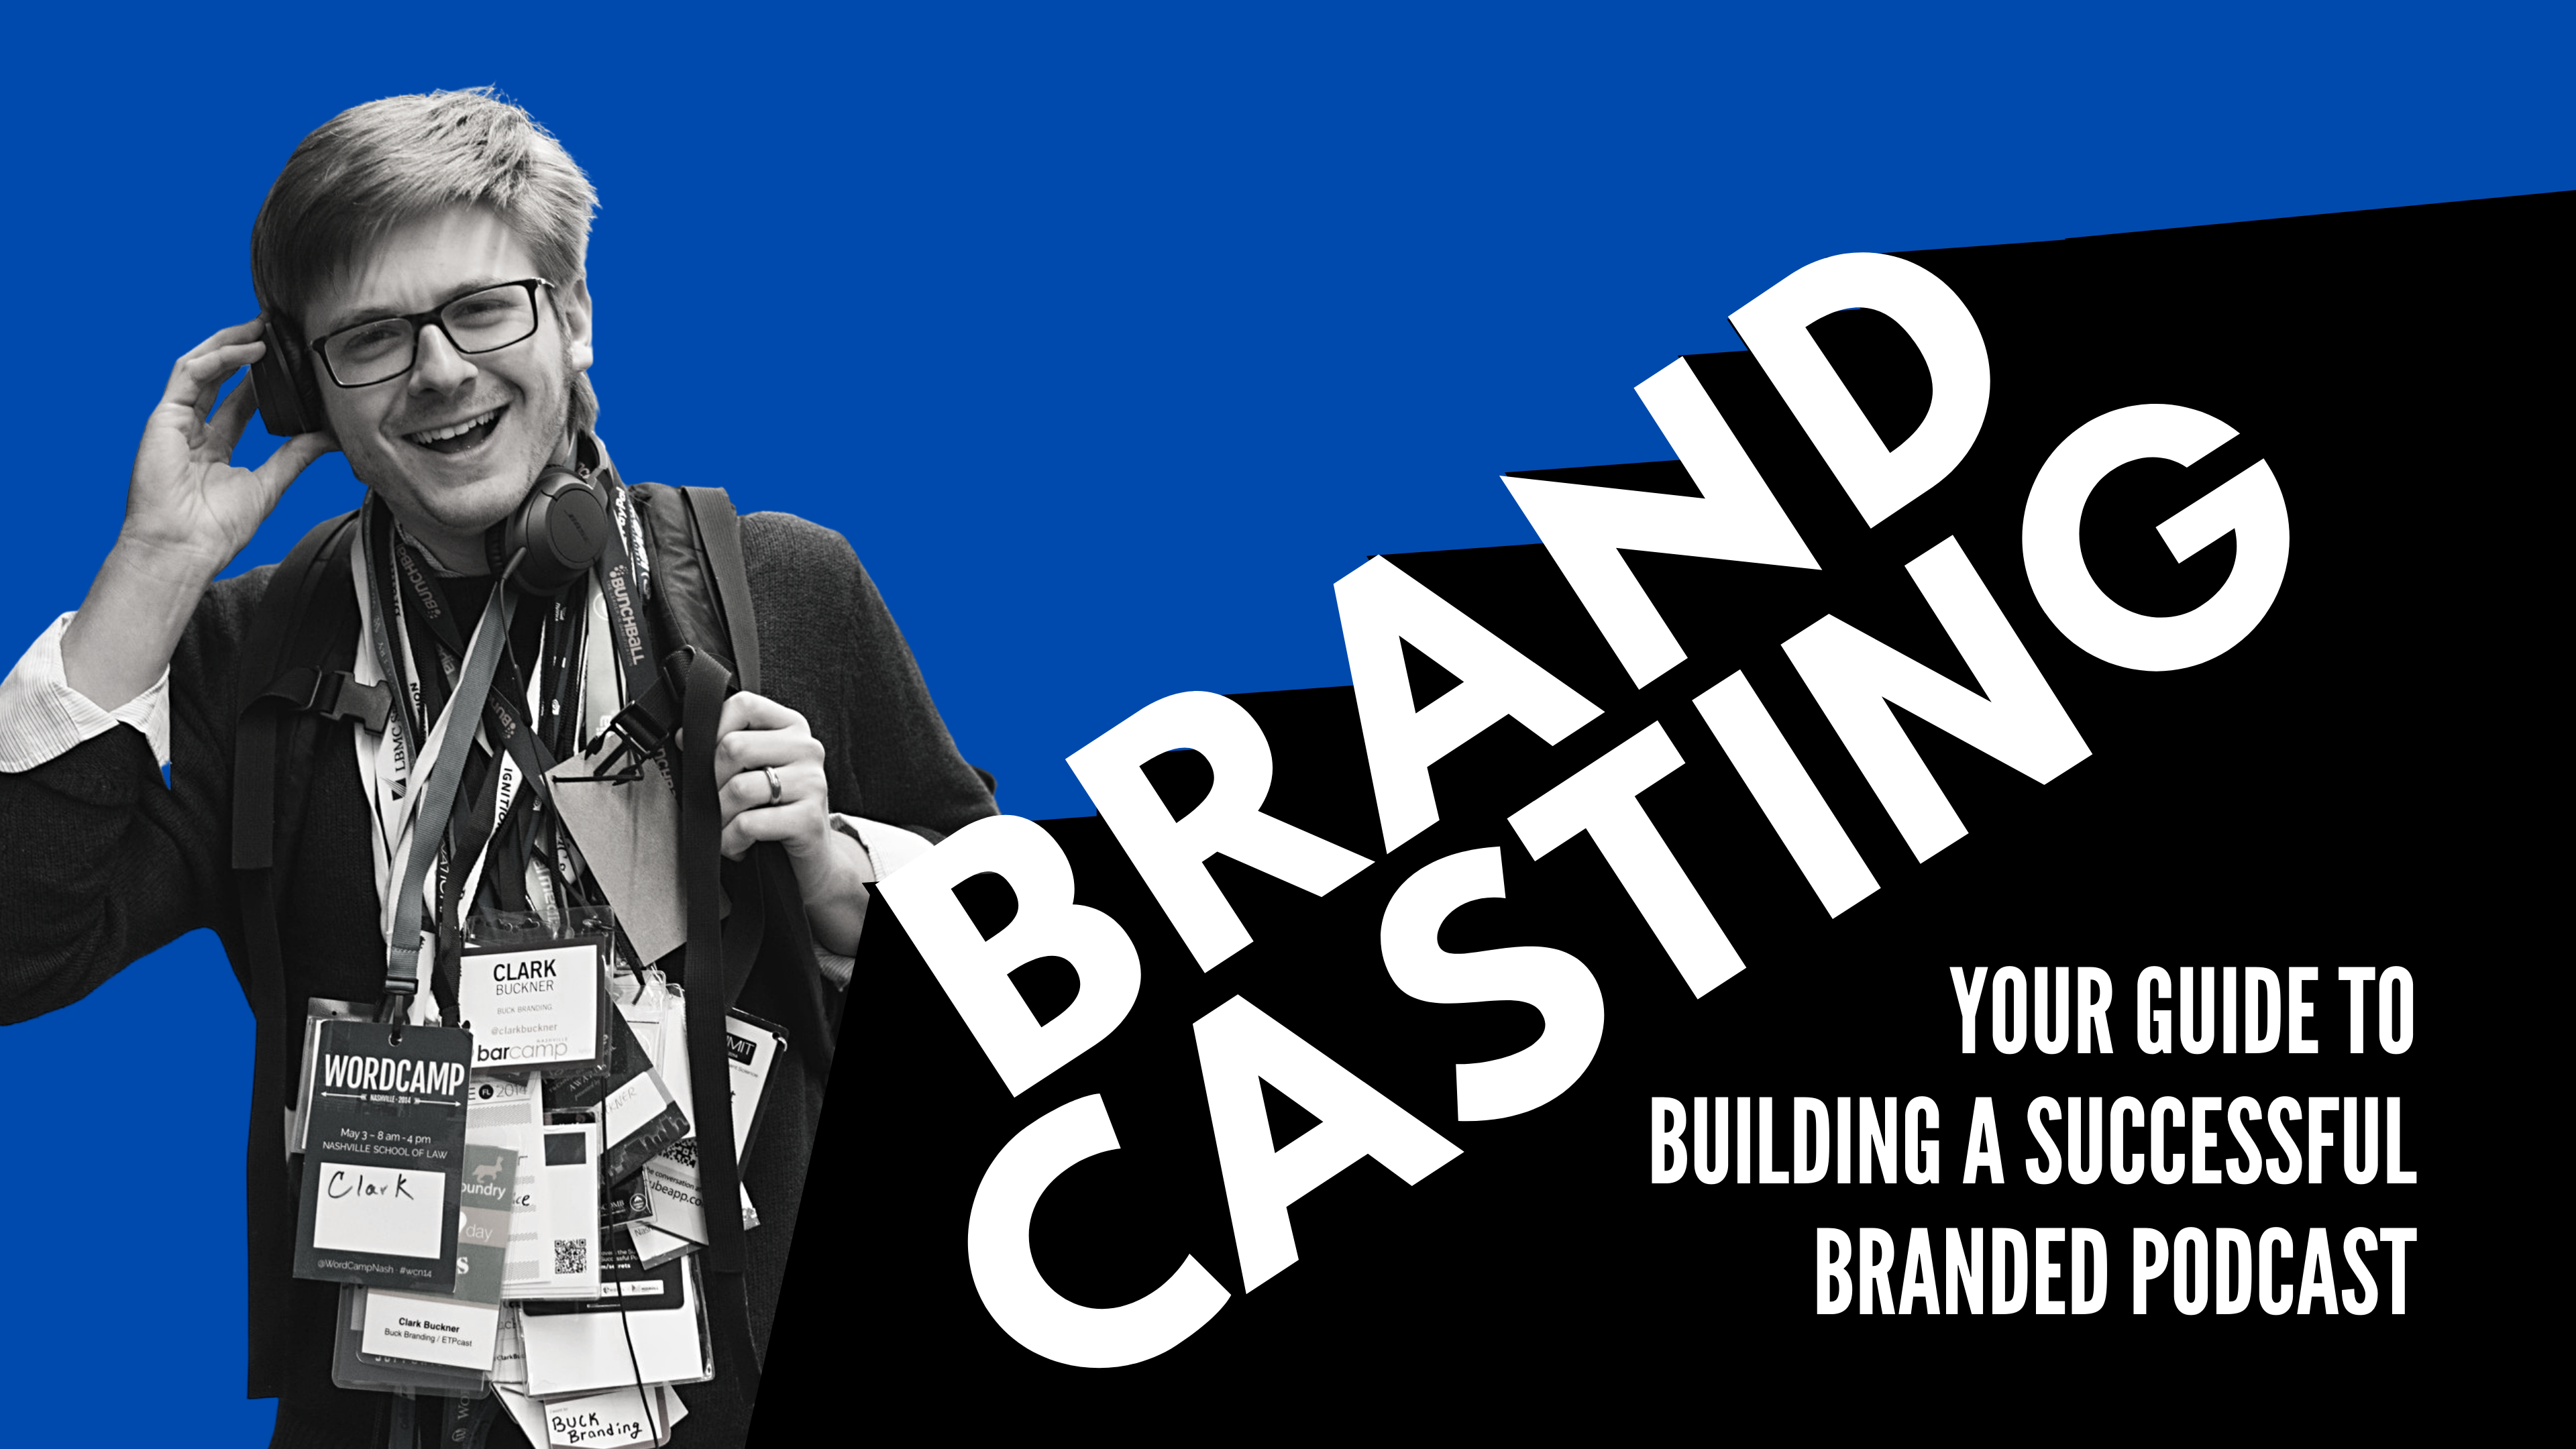 Brandcasting - Five Steps for Building a Successful Branded Podcast